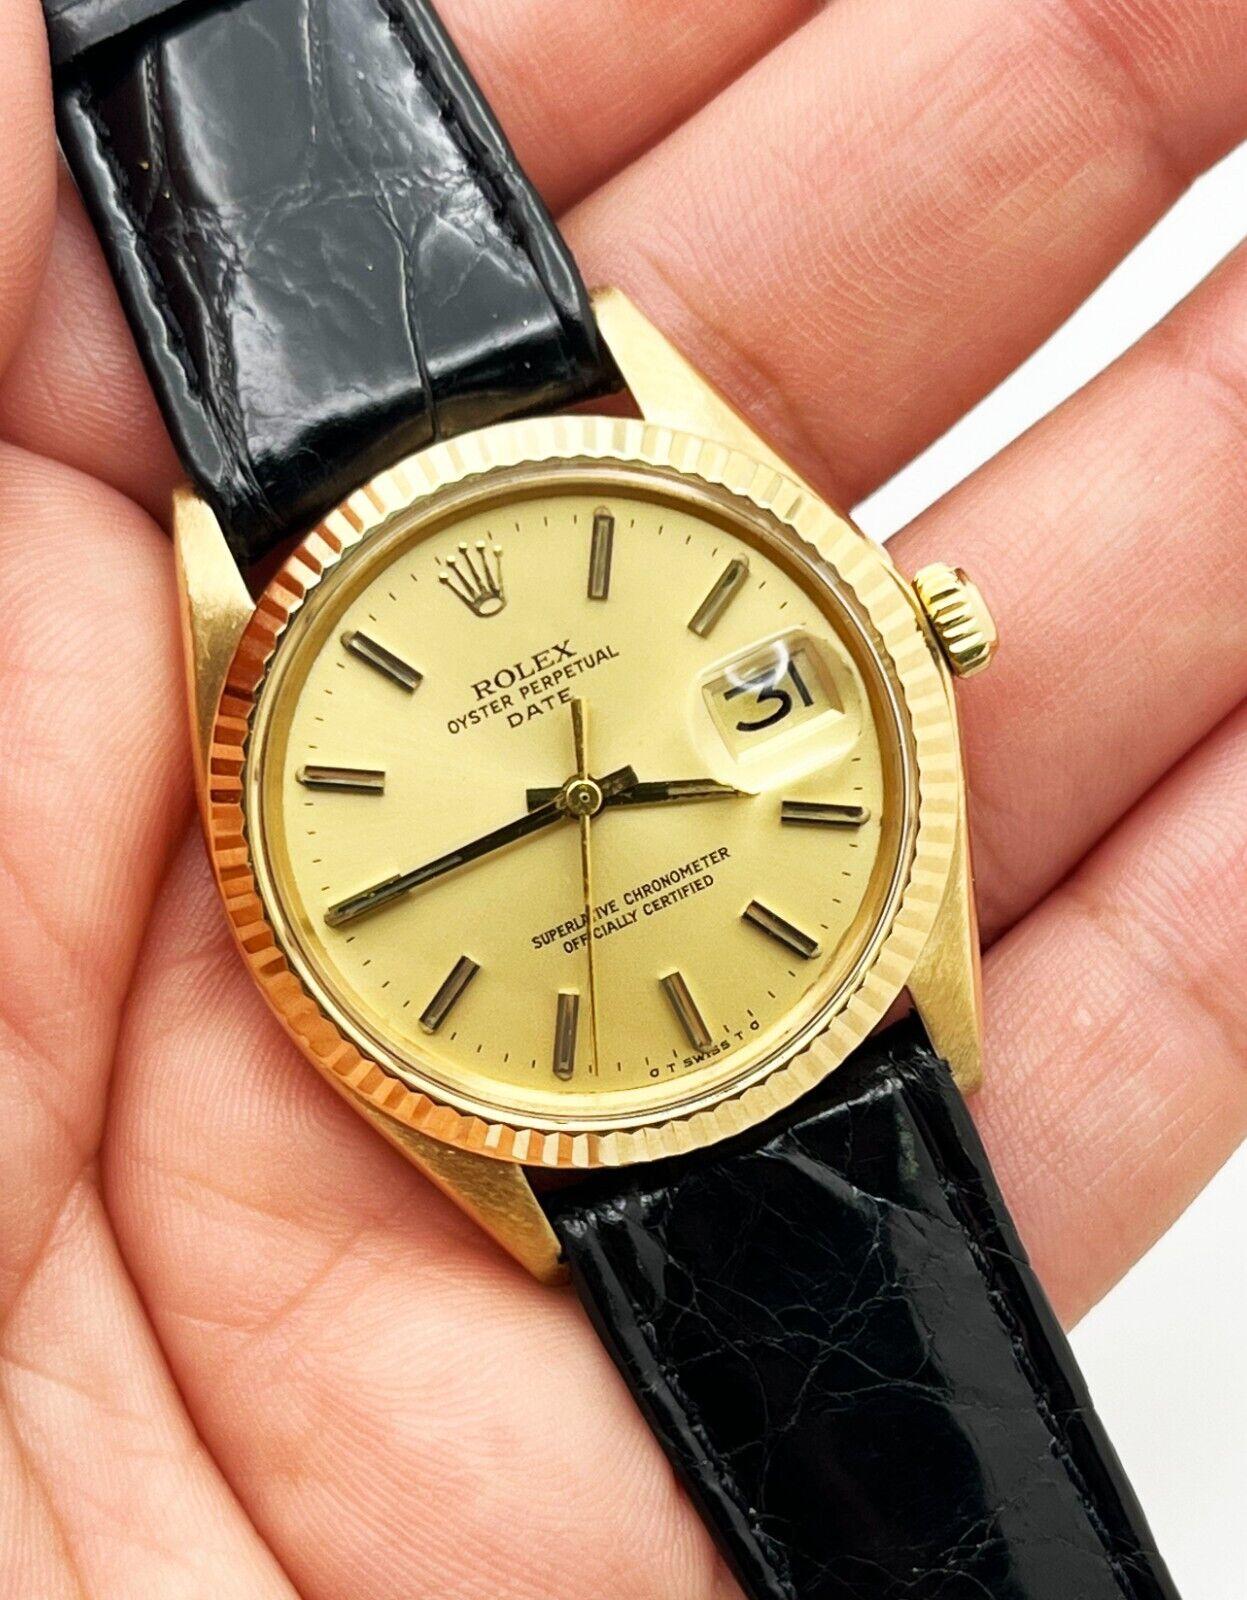 Style Number: 1503

Serial: 6403***

Year: 1980
 
Model: Oyster Perpetual Date
 
Case Material: 18K Yellow Gold
 
Band: Rolex Leather Band
  
Bezel: 18K Yellow Gold
  
Dial: Champagne
 
Face: Acrylic
 
Case Size: 34mm
 
Includes: 
-Elegant Watch